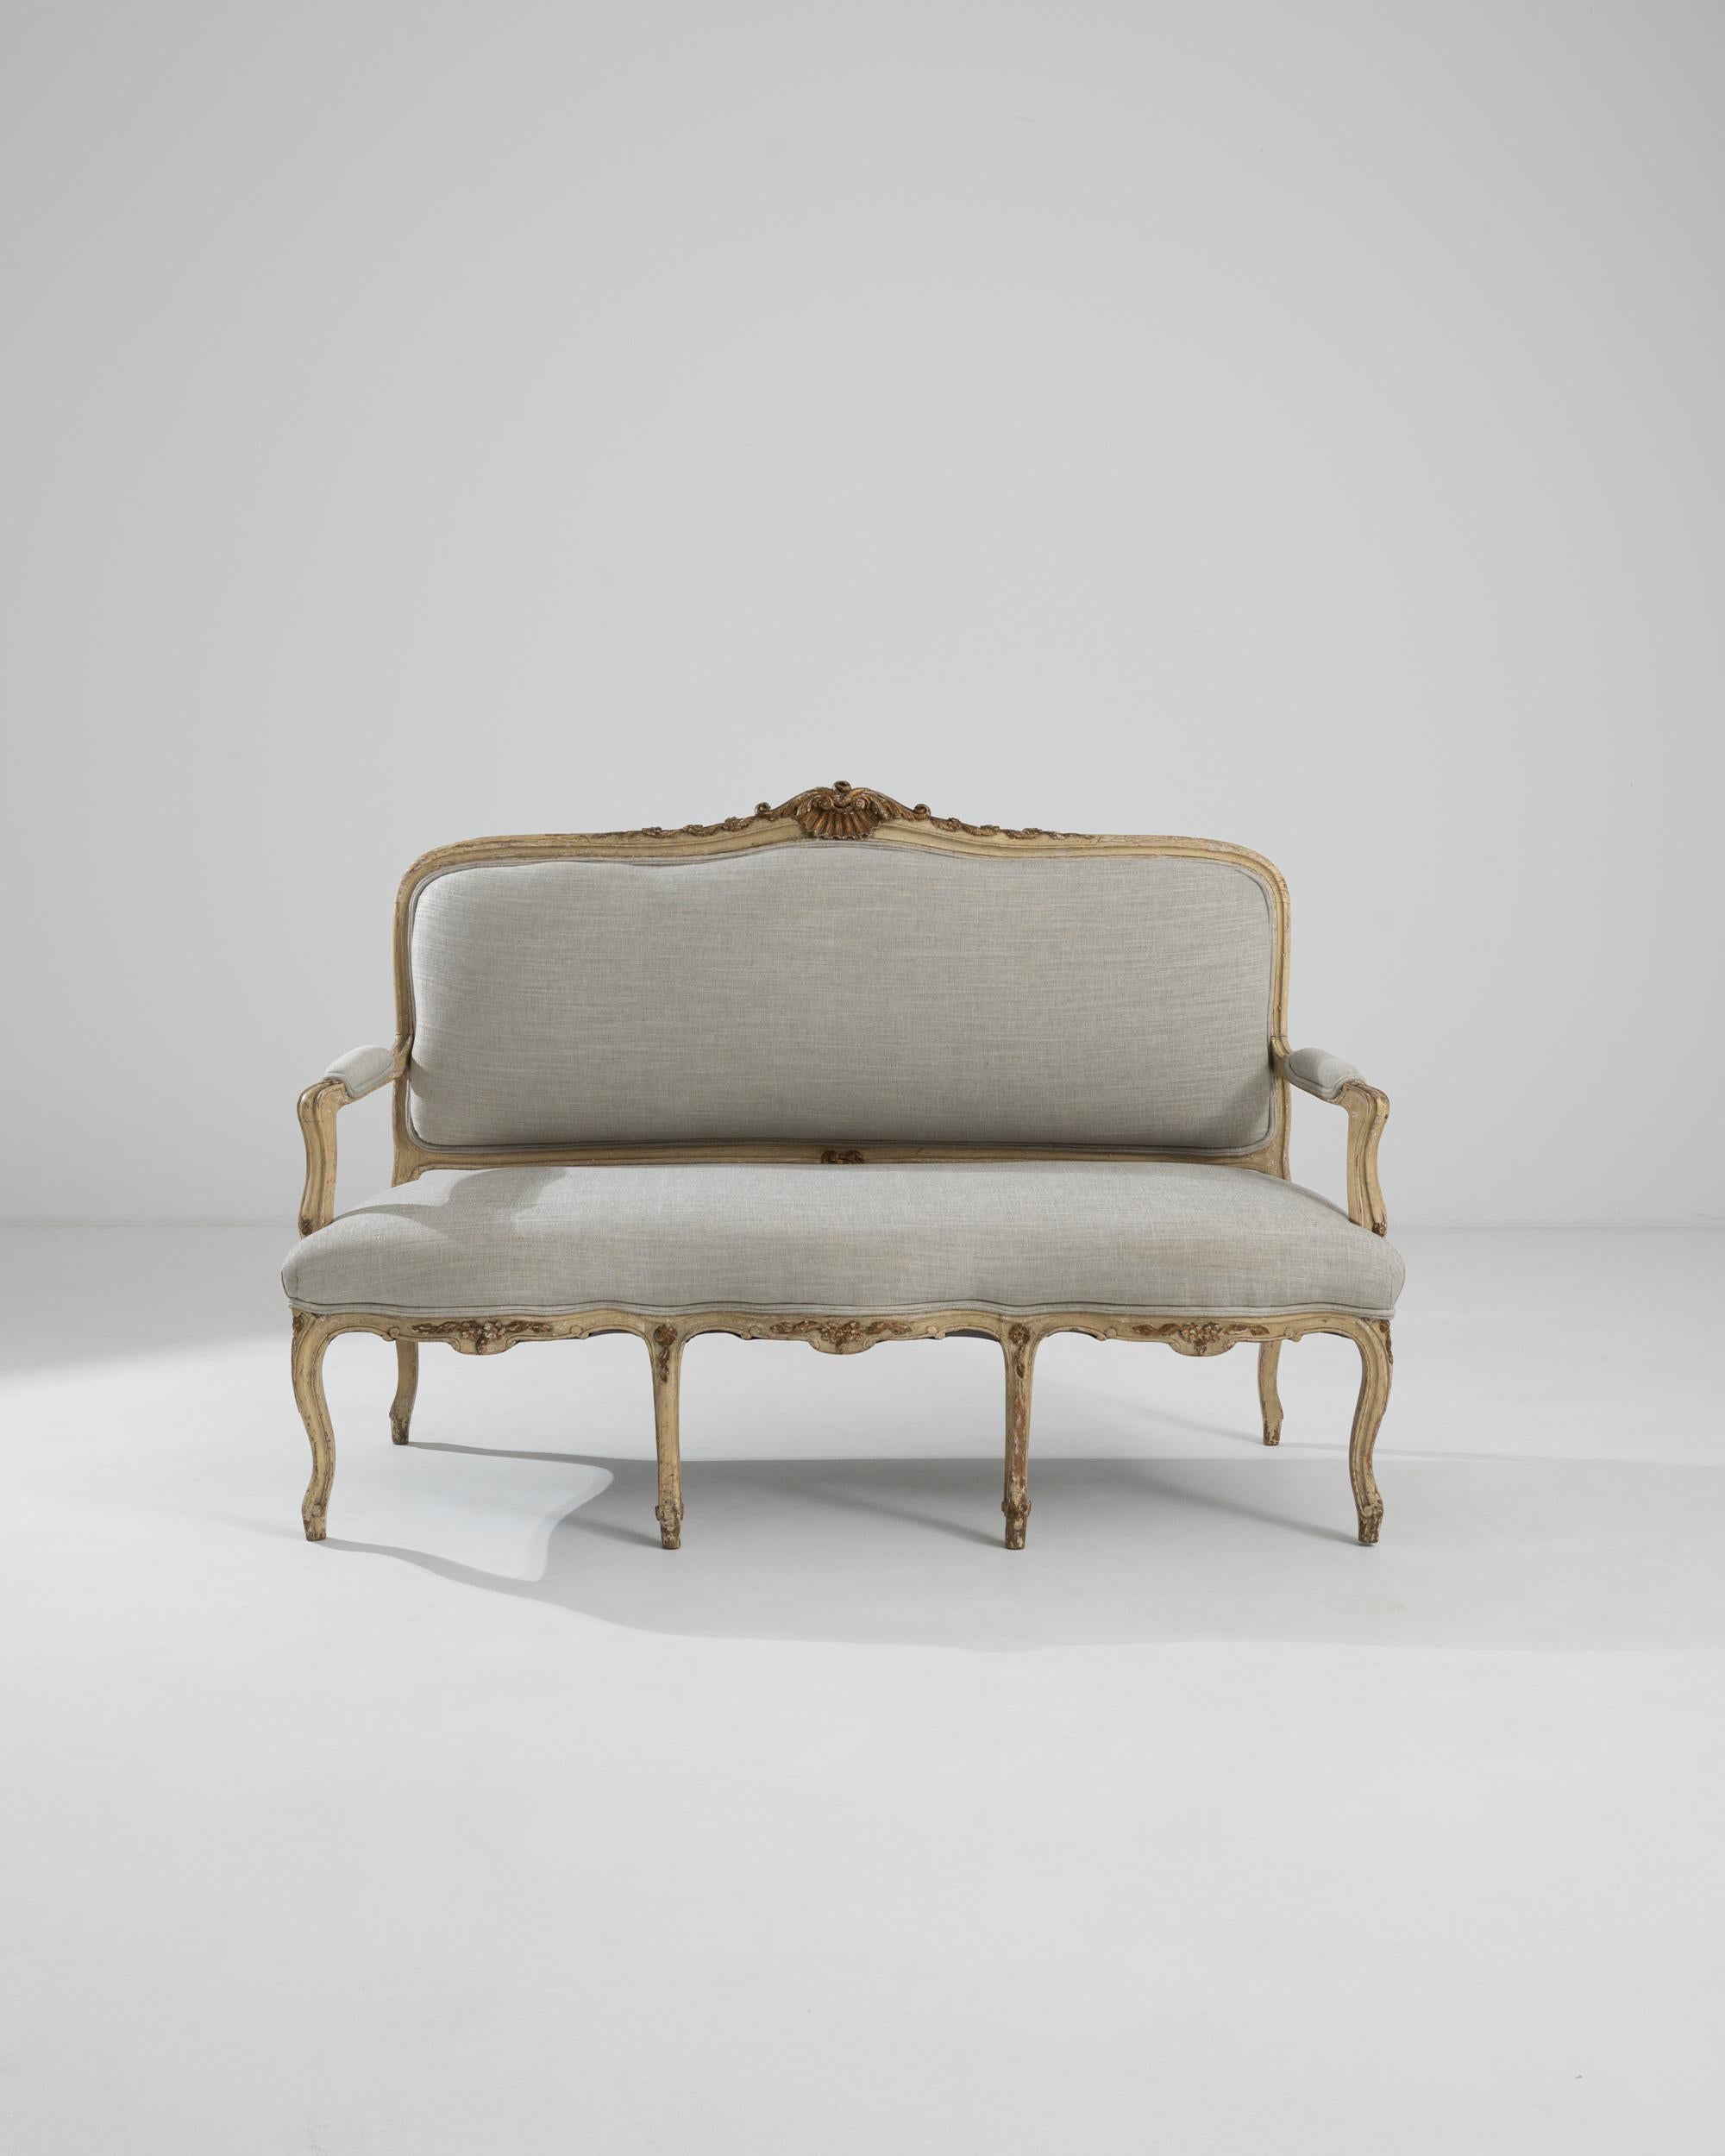 Elegant and refined, this antique wooden settee is a Rococo gem. Made in France in the 1800s, this piece would have originally been used for entertaining; the light, graceful form and comfortable cushioned seat provide the perfect accompaniment to